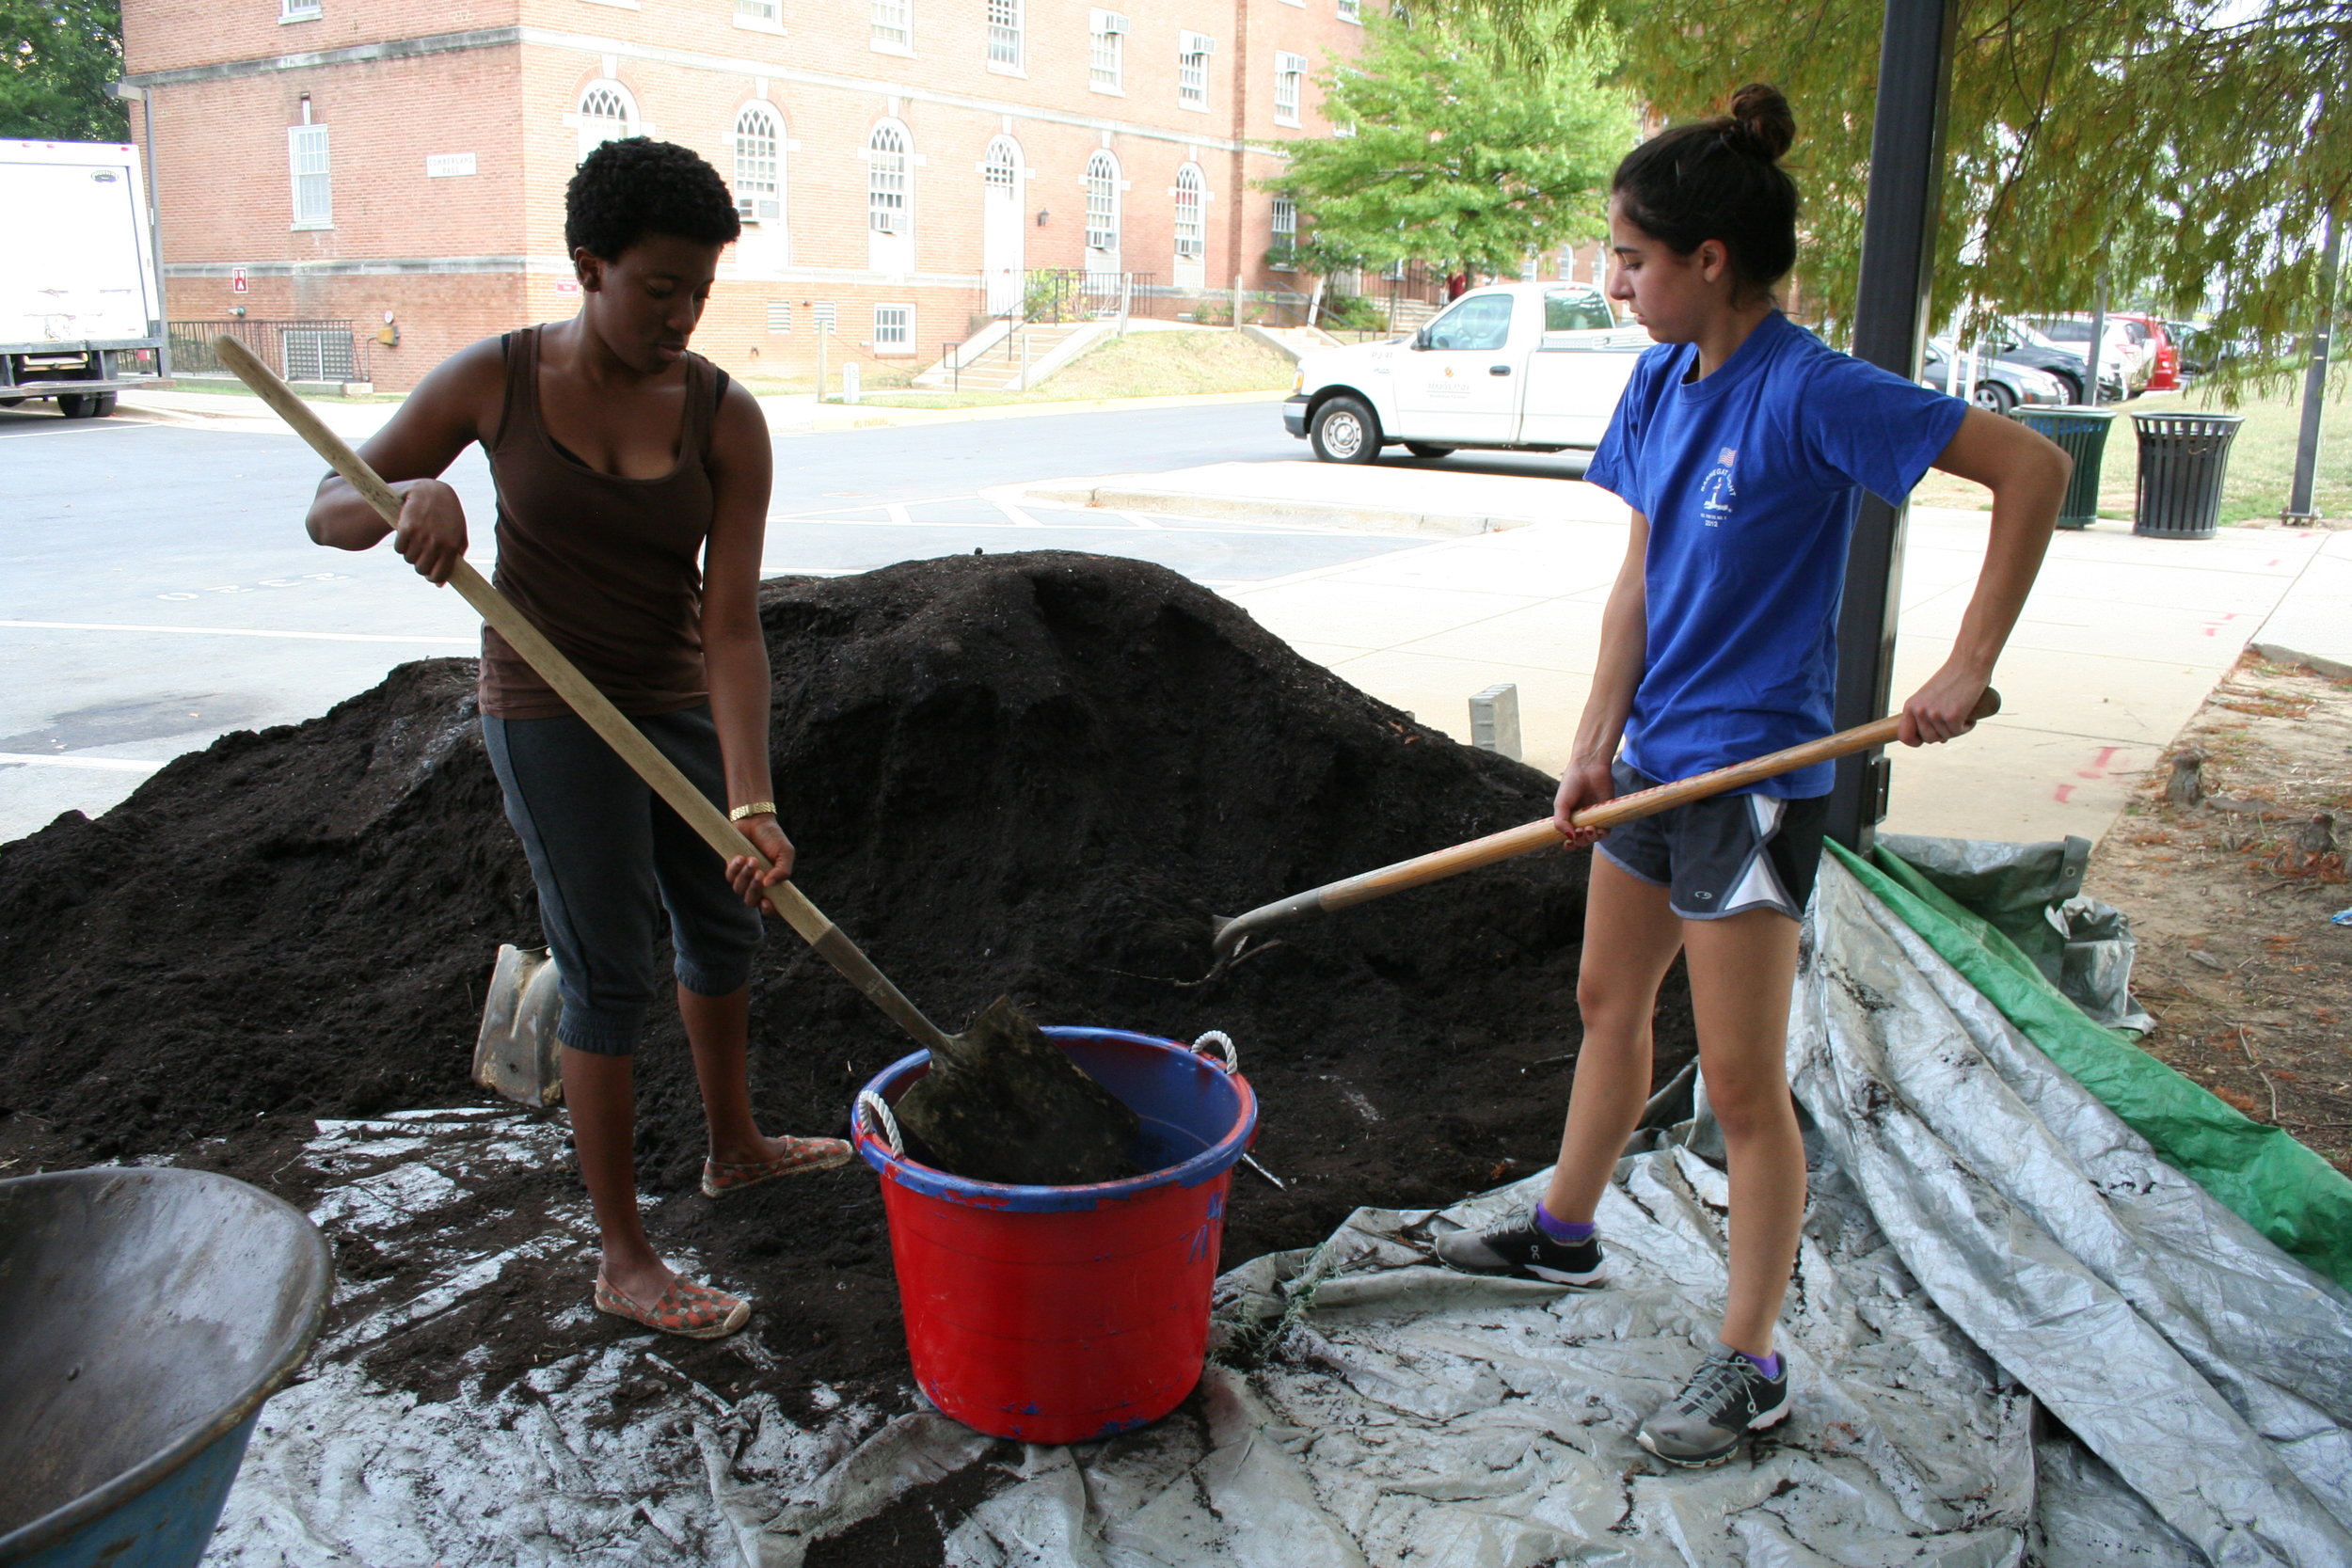  Asamaniwa Padi-Adjirackor, left, &nbsp;a sophomore agriculture and resource economics major and Claudia Romeo, right, a freshman elementary education major, begin their work hour at the Public Health Garden by shoveling and transporting compost prov